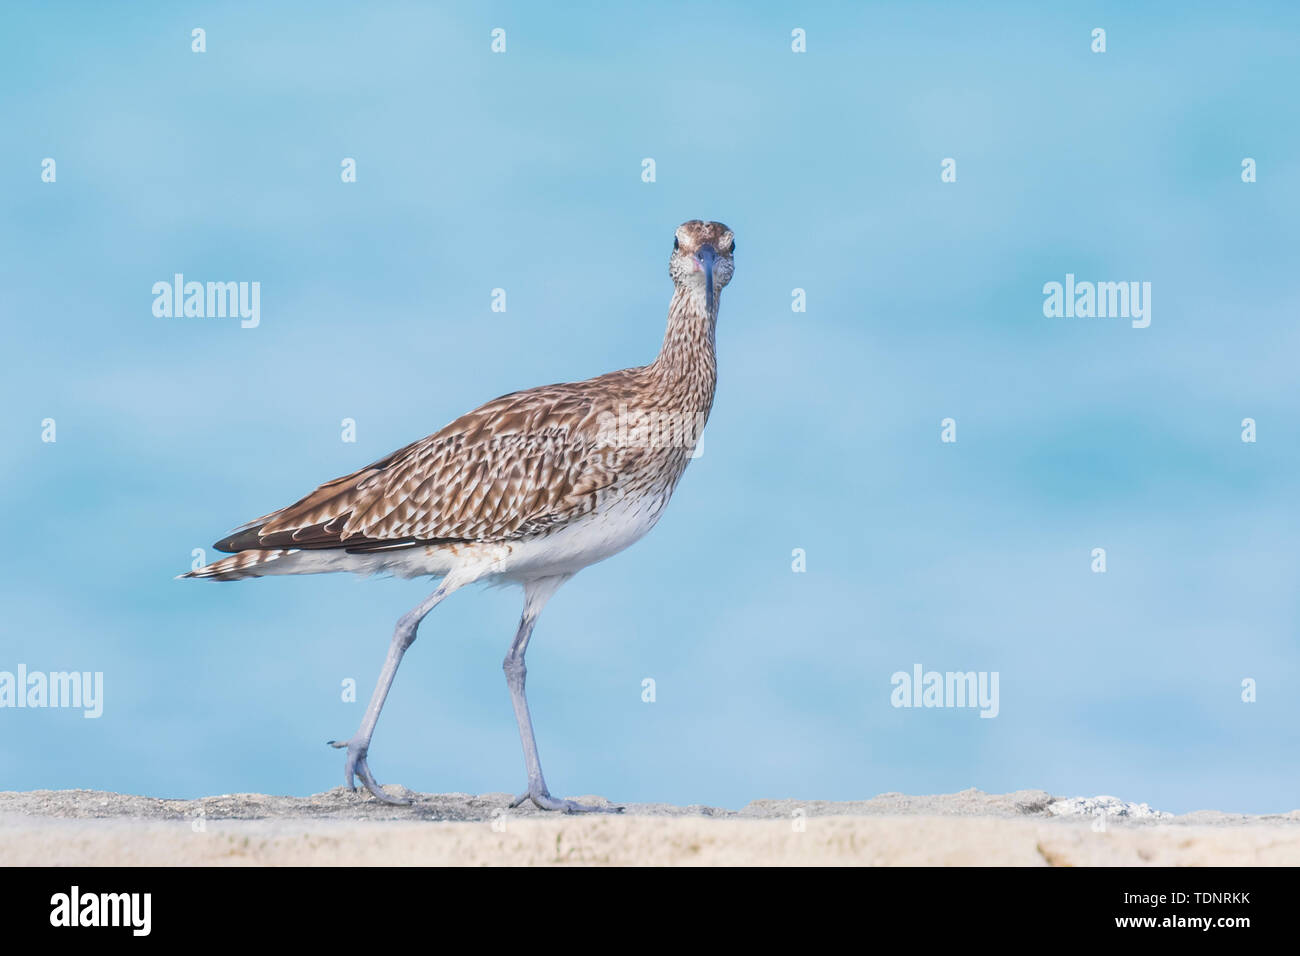 Eurasian curlew Numenius arquata shorebird perched on rocks in front of the Indian Ocean. Stock Photo